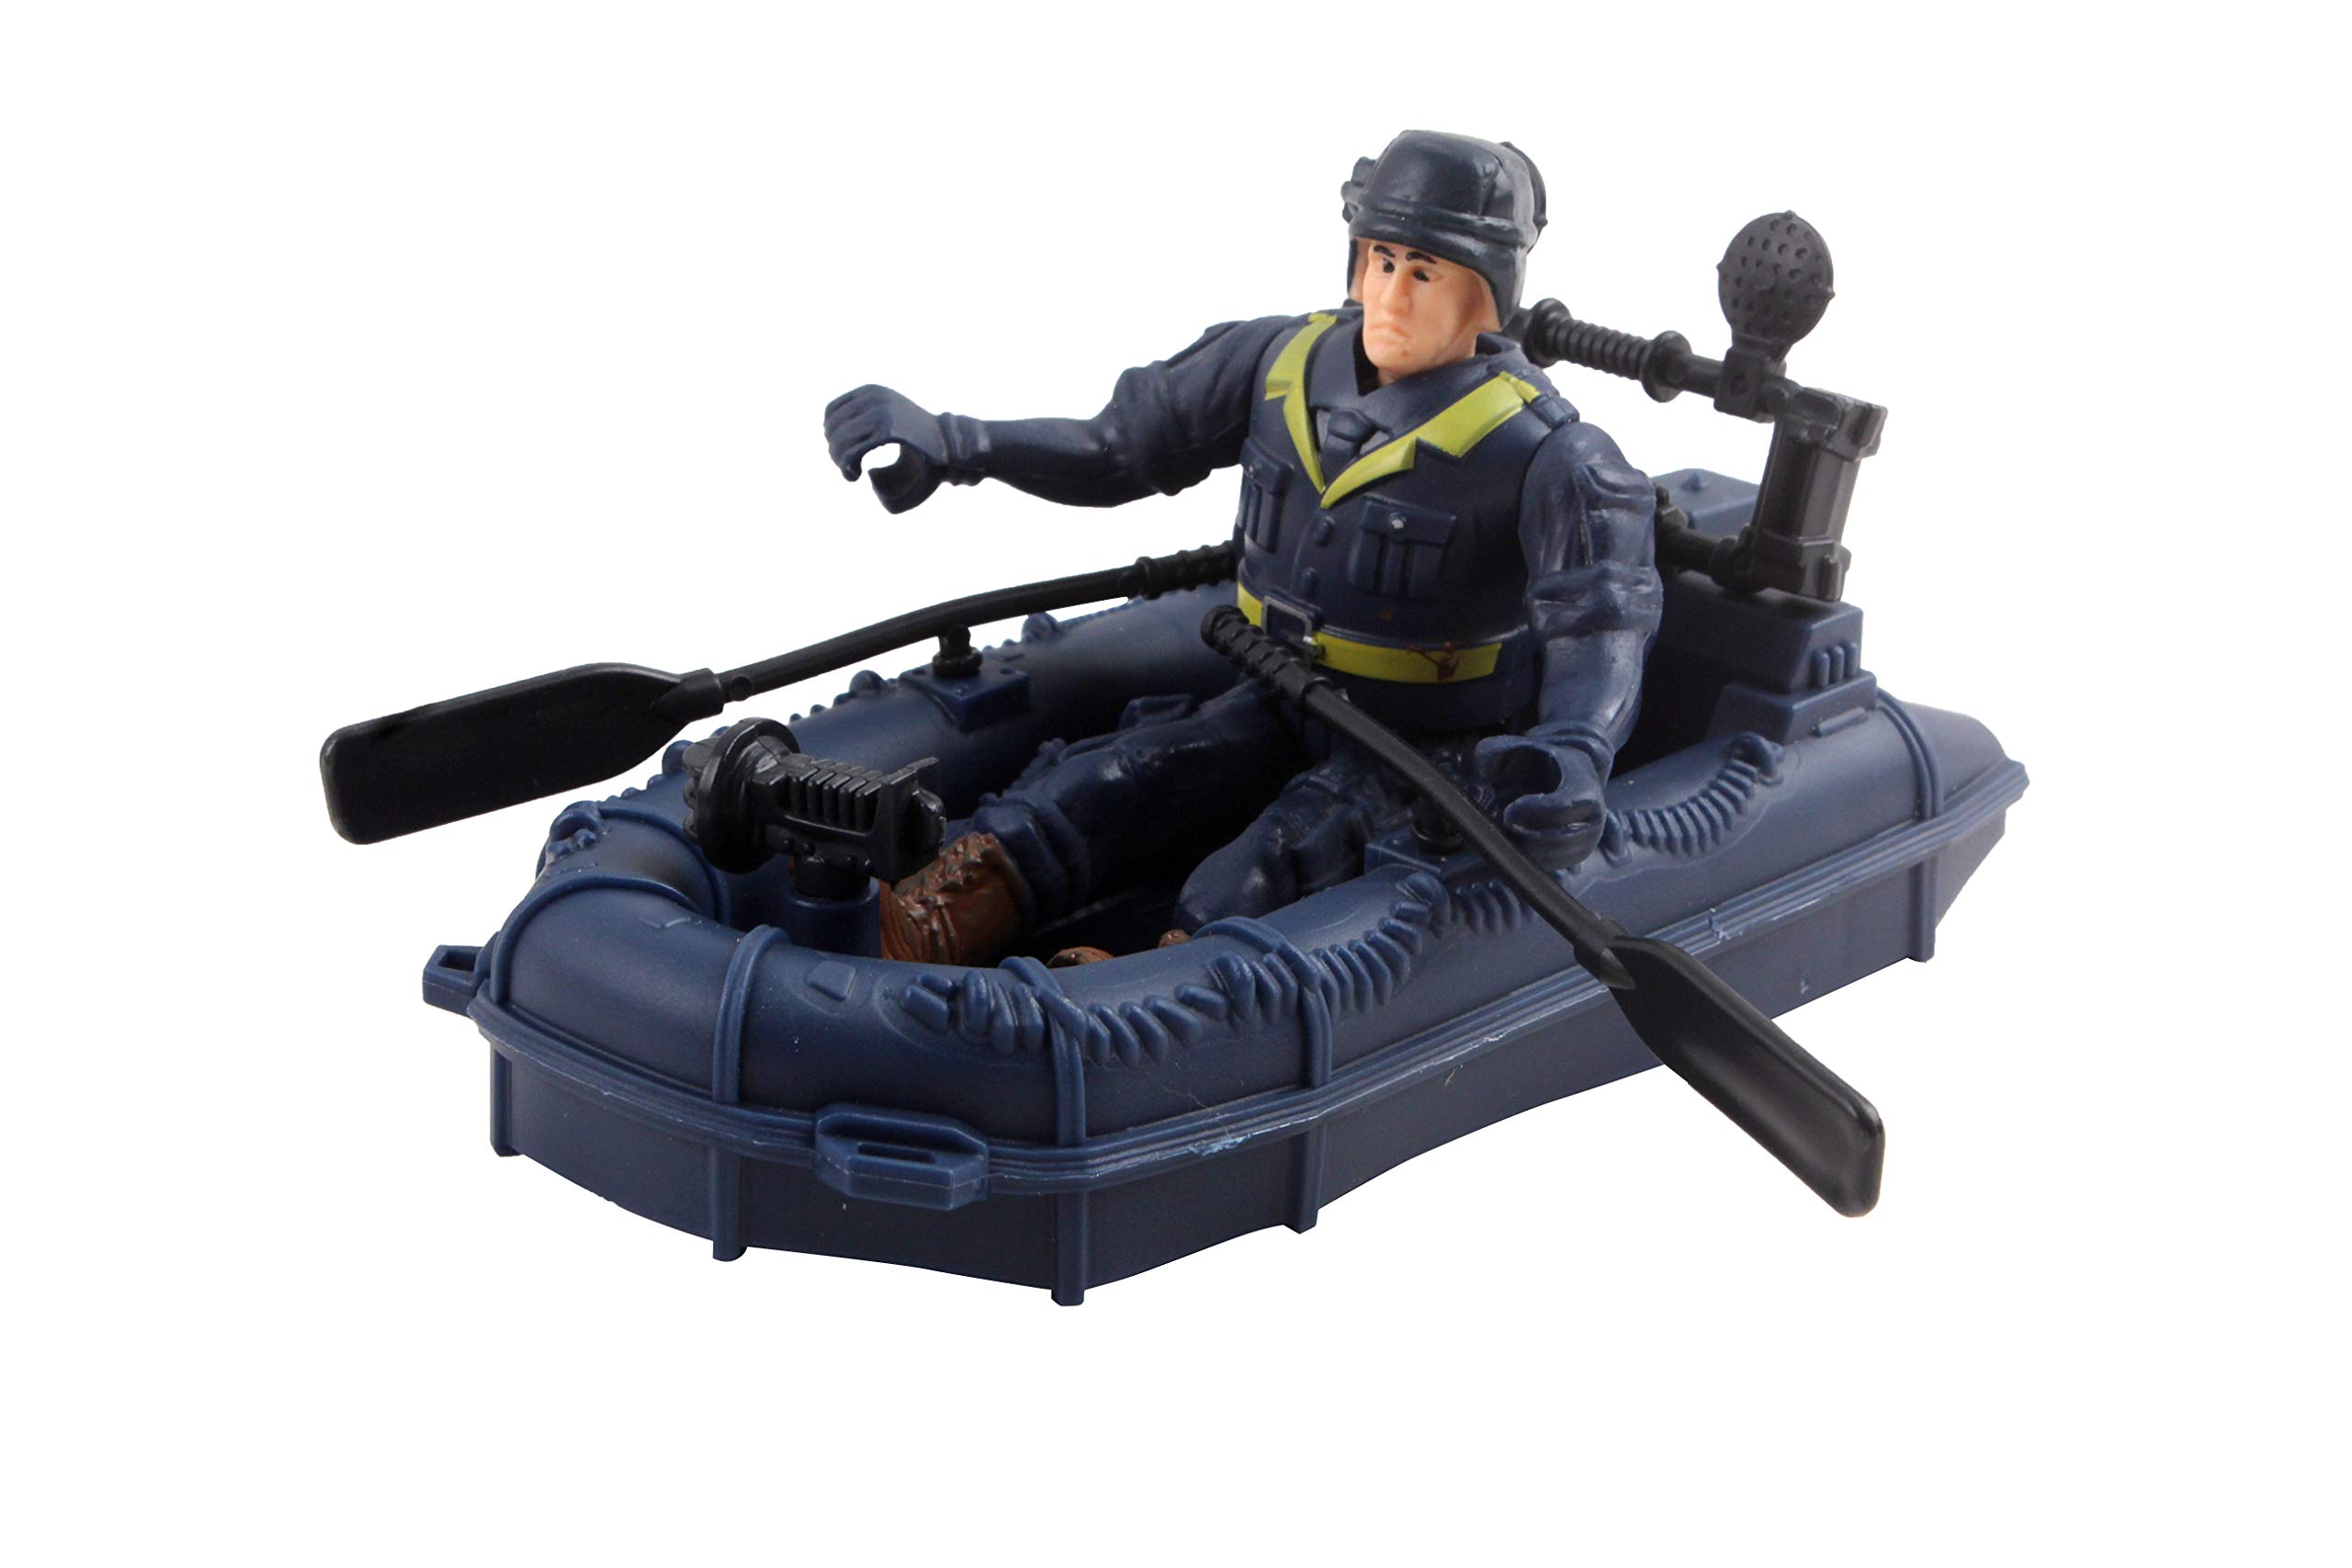 Vokodo Deluxe Police Special Operations Rescue Series Play Set Includes Armed Helicopter Armored Vehicle Ambulance Water Raft Canoe Soldier and Artillery Perfect Kids Pretend Army Action Toys